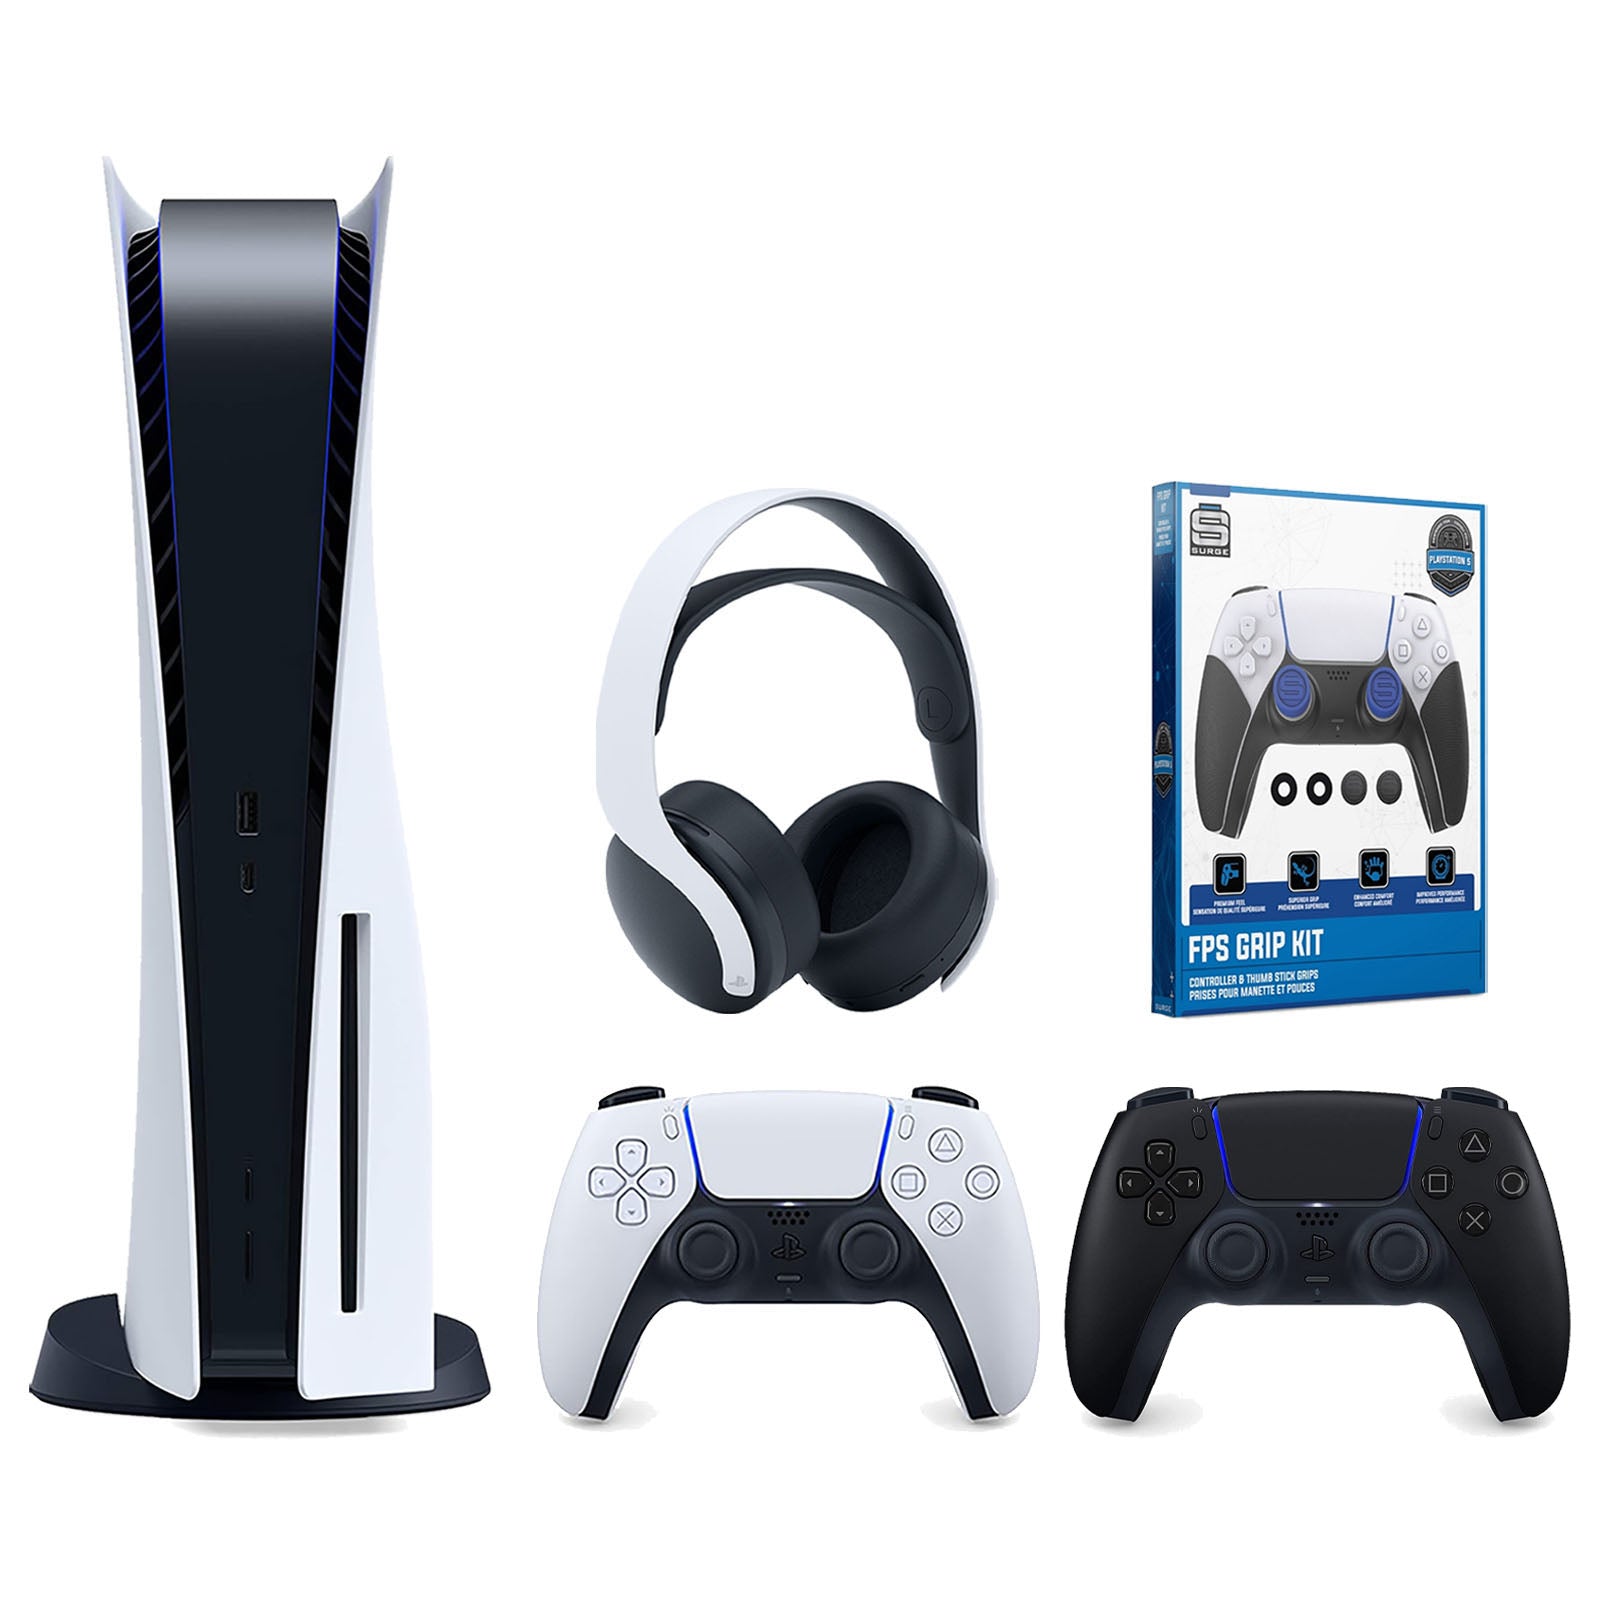 Sony Playstation 5 Disc Version Console with Extra Black Controller, White PULSE 3D Headset and Surge FPS Grip Kit With Precision Aiming Rings Bundle - Pro-Distributing